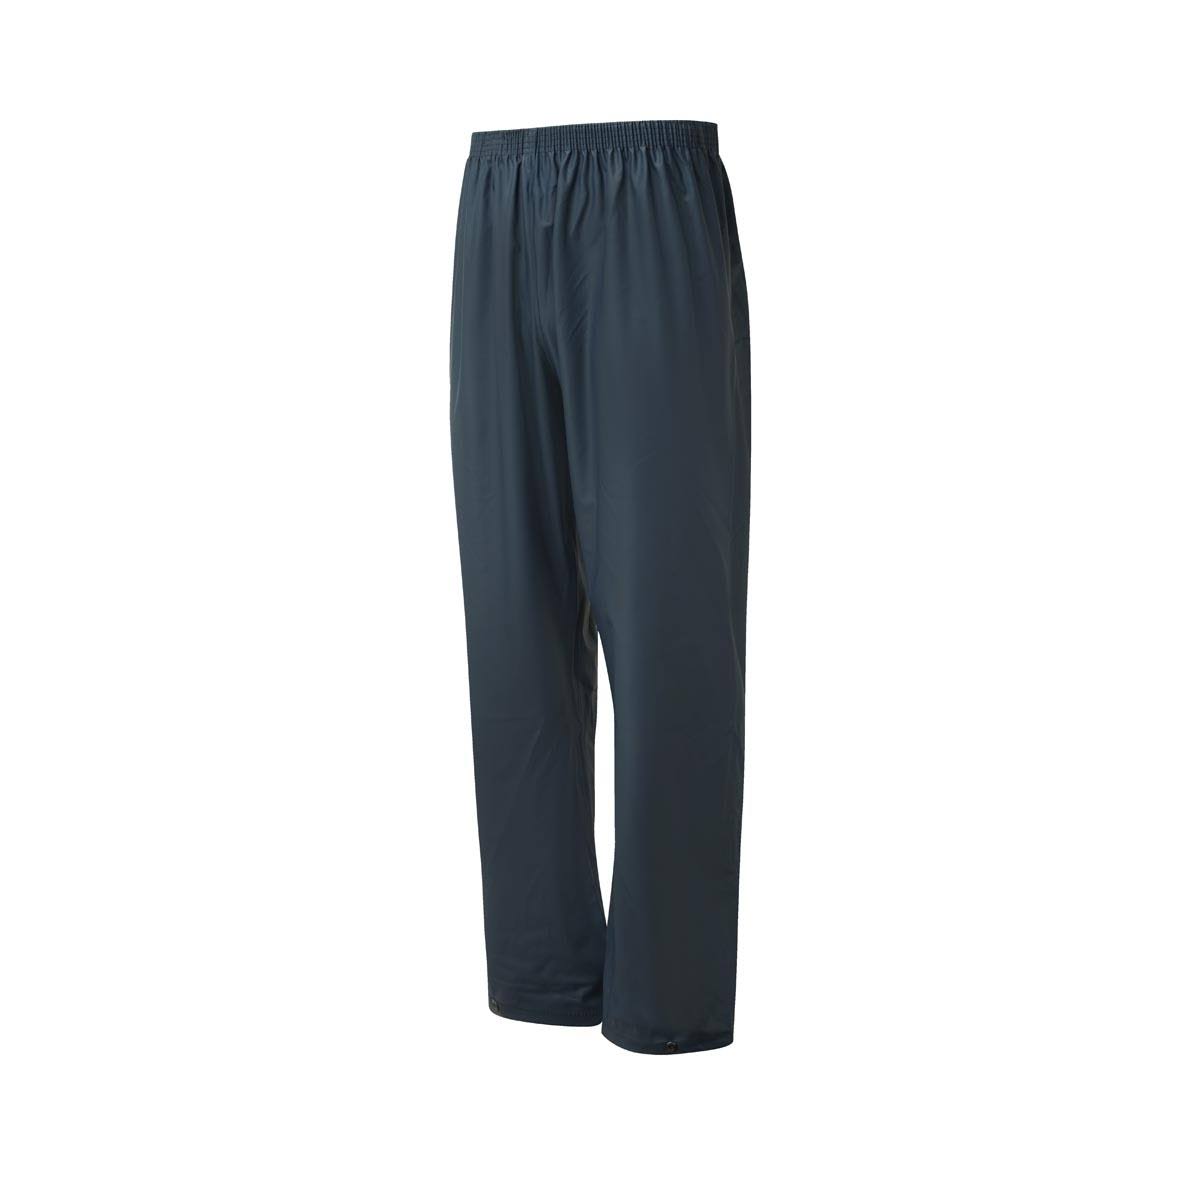 Fort 921-NVY-L 921 Airflex Trouser Navy Blue - L | By Toolden